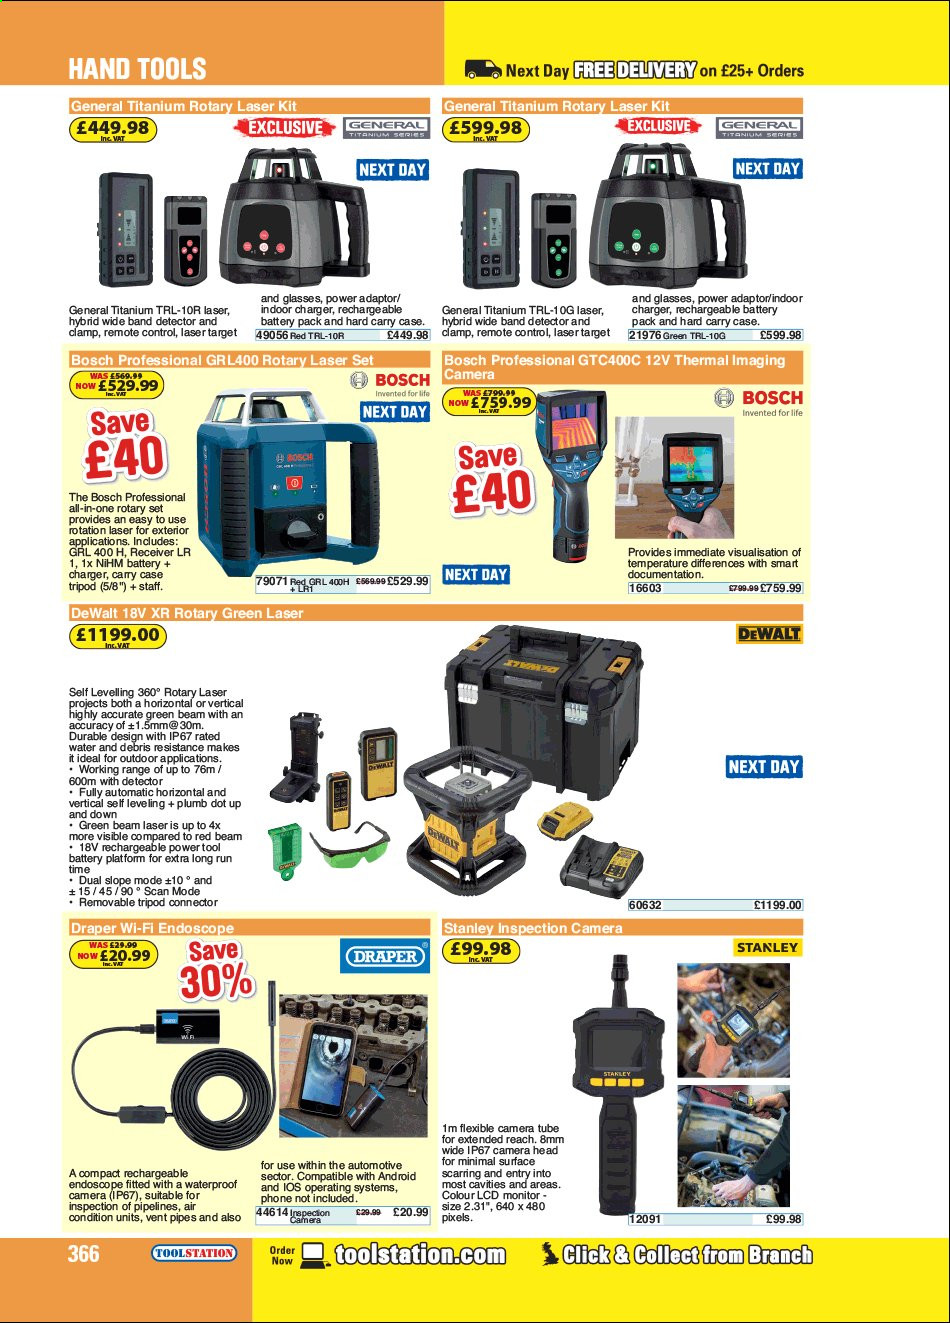 thumbnail - Toolstation offer  - Sales products - Bosch, Stanley, DeWALT, hand tools. Page 366.